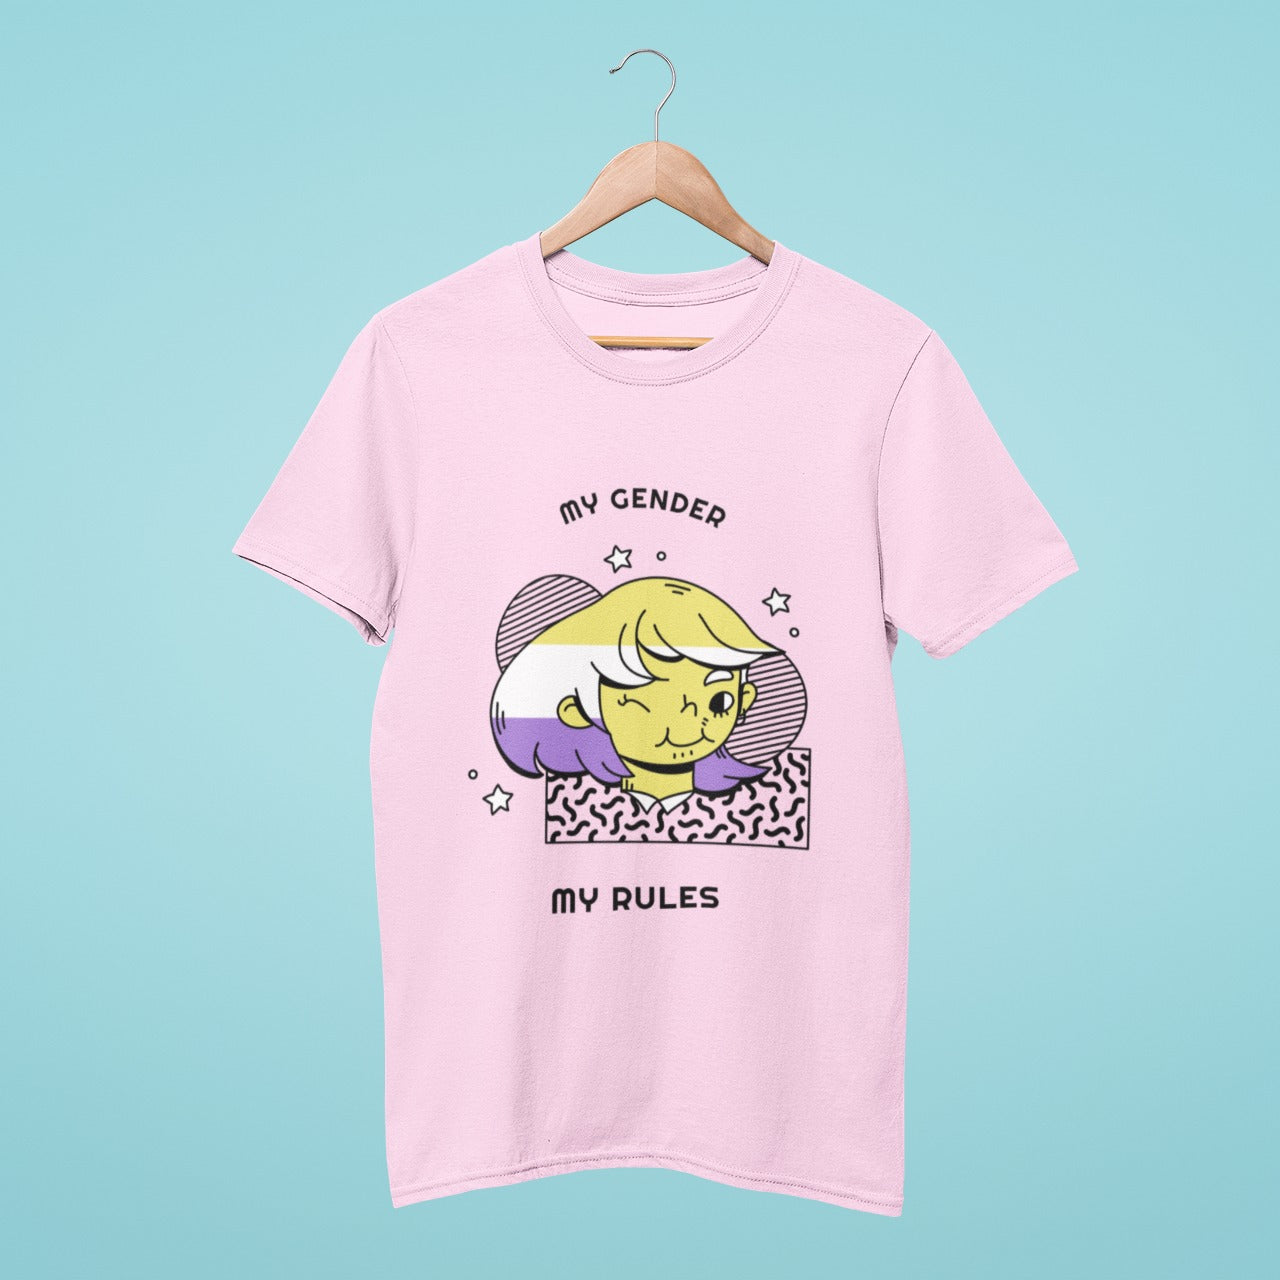 Celebrate your unique identity with our pink t-shirt featuring "My Gender My Rules" slogan and a graphic of a winking girl. Made from high-quality materials, this tee is perfect for self-expression and empowering individuals to stand up for themselves. Order now and show your support for the LGBTQ+ community with this empowering and stylish t-shirt that's sure to make a statement!